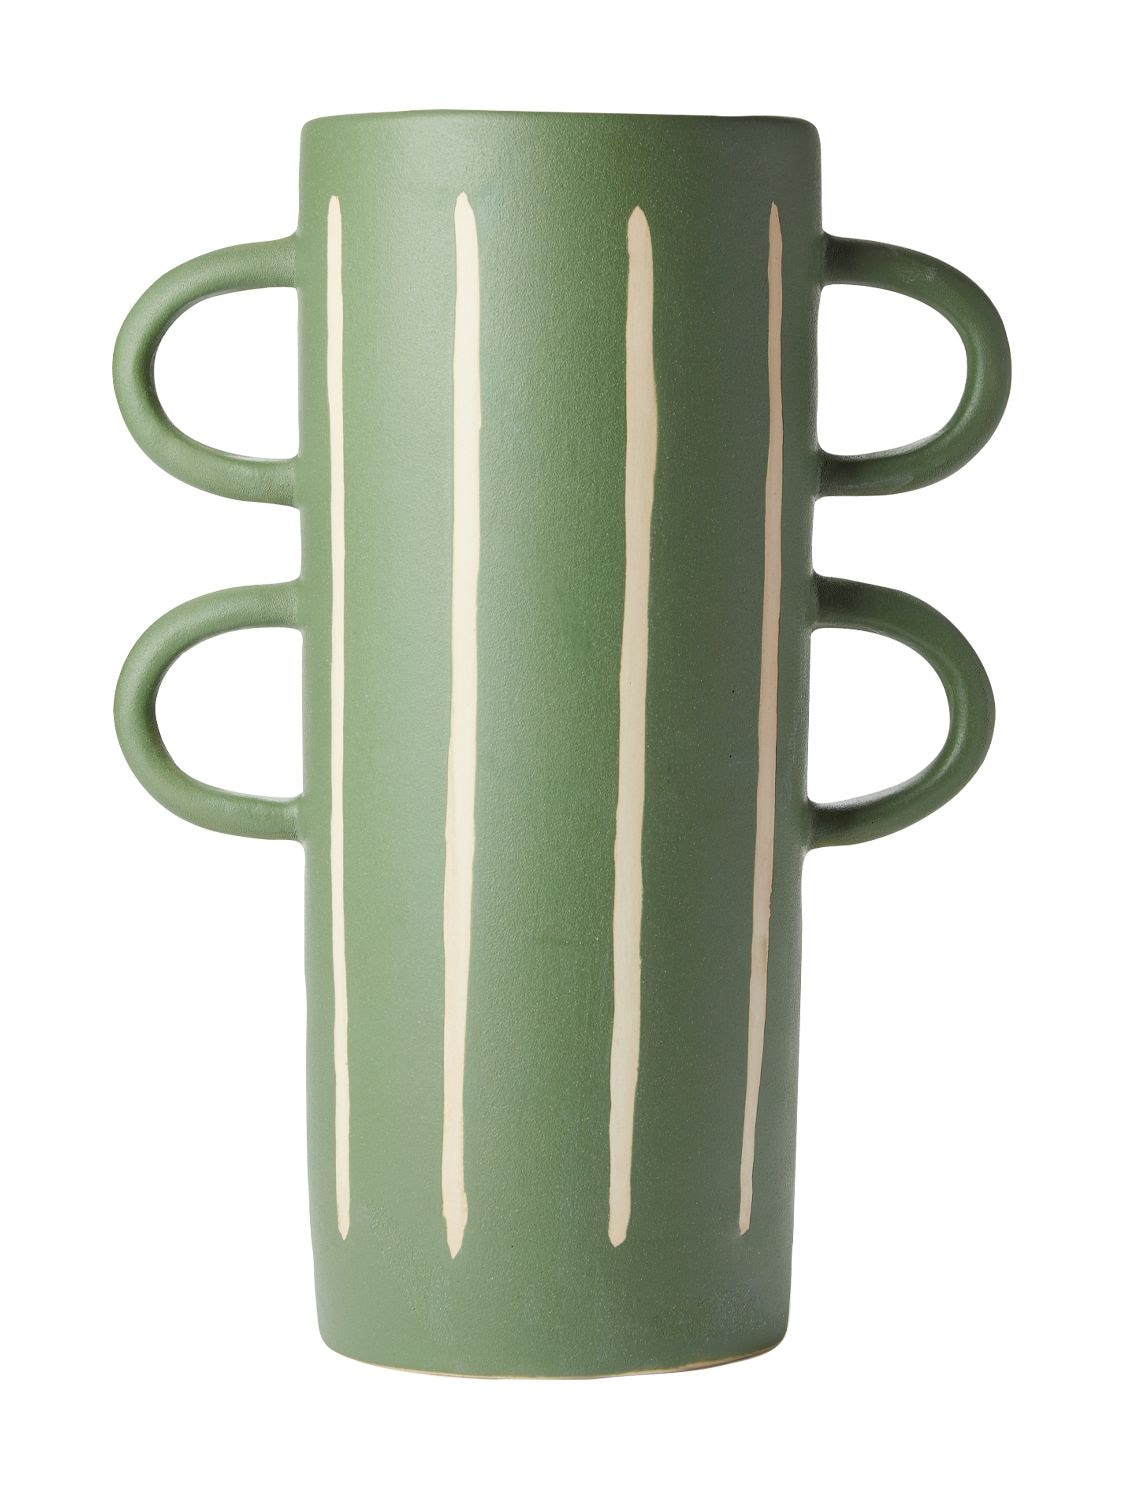 Image of Wax Resist Striped Tall Vase W/ Handles